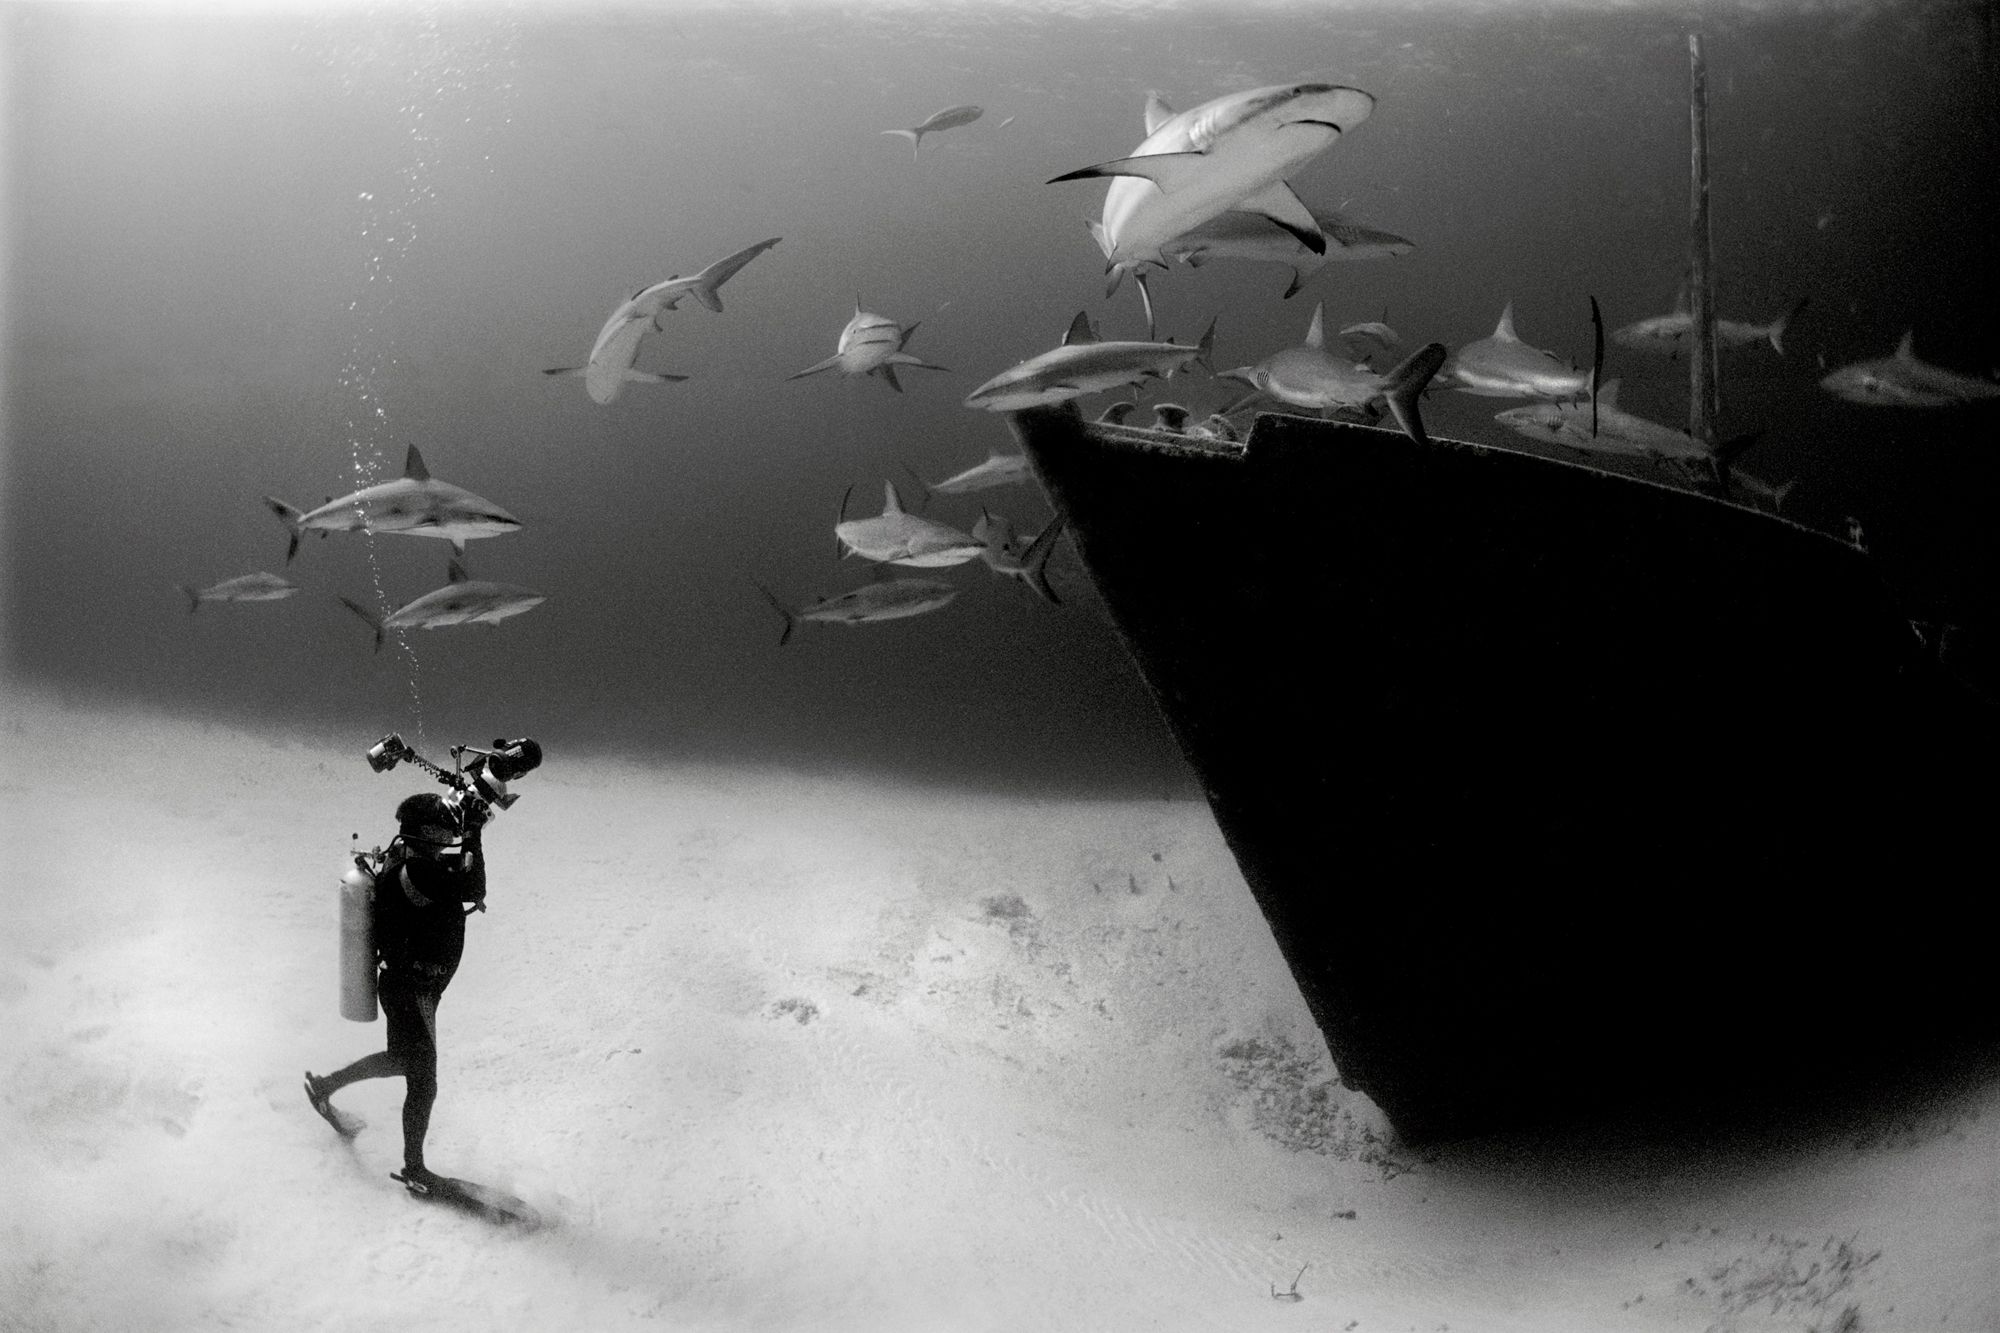 General 2000x1333 National Geographic photography underwater shark monochrome shipwreck